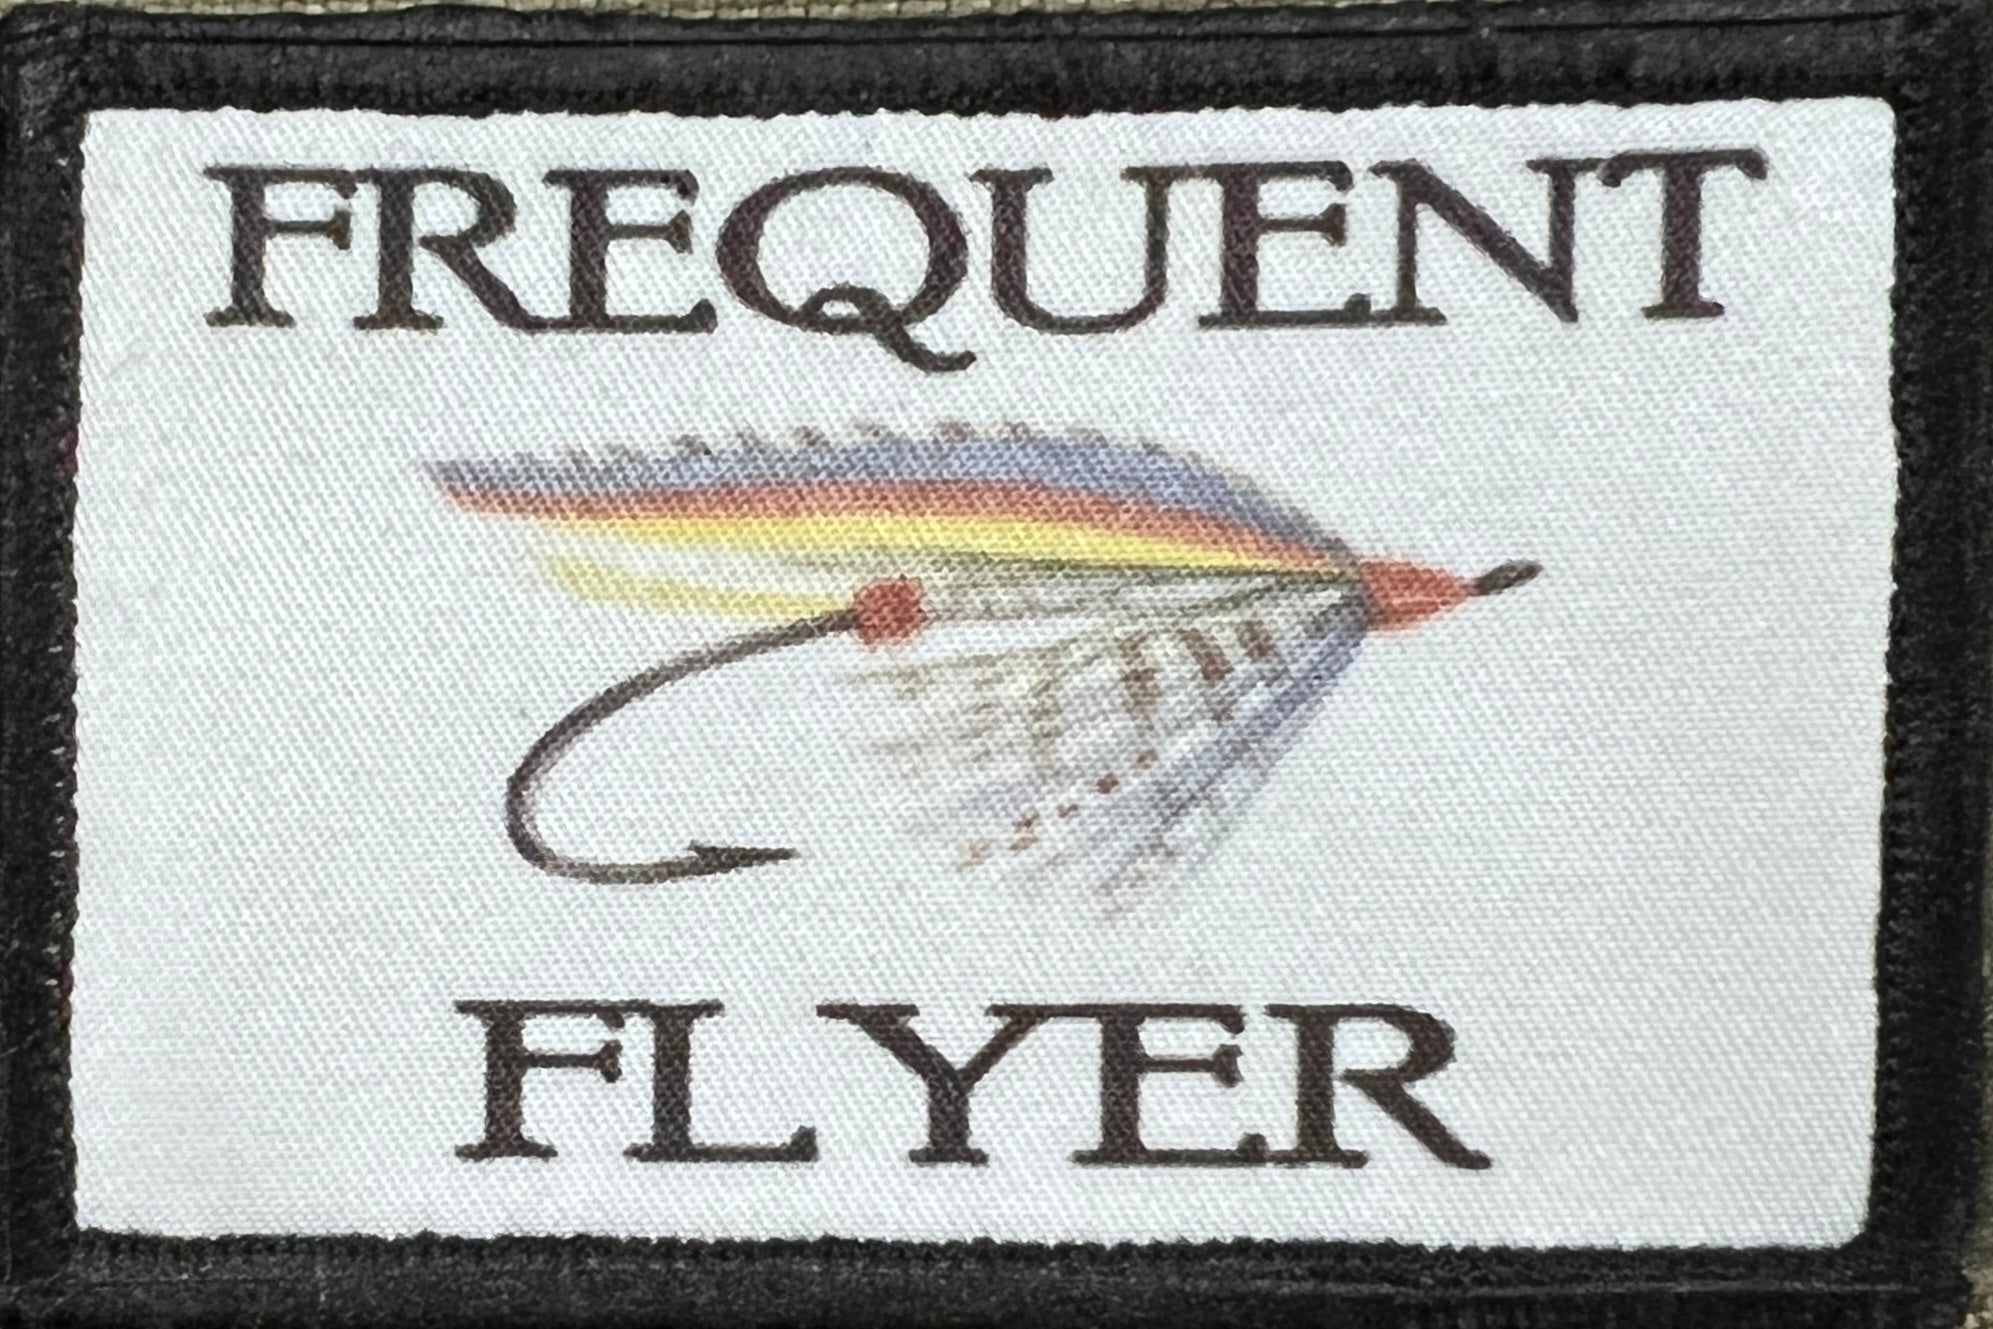 Frequent Flyer Fly Fishing Morale Patch Morale Patches Redheaded T Shirts 